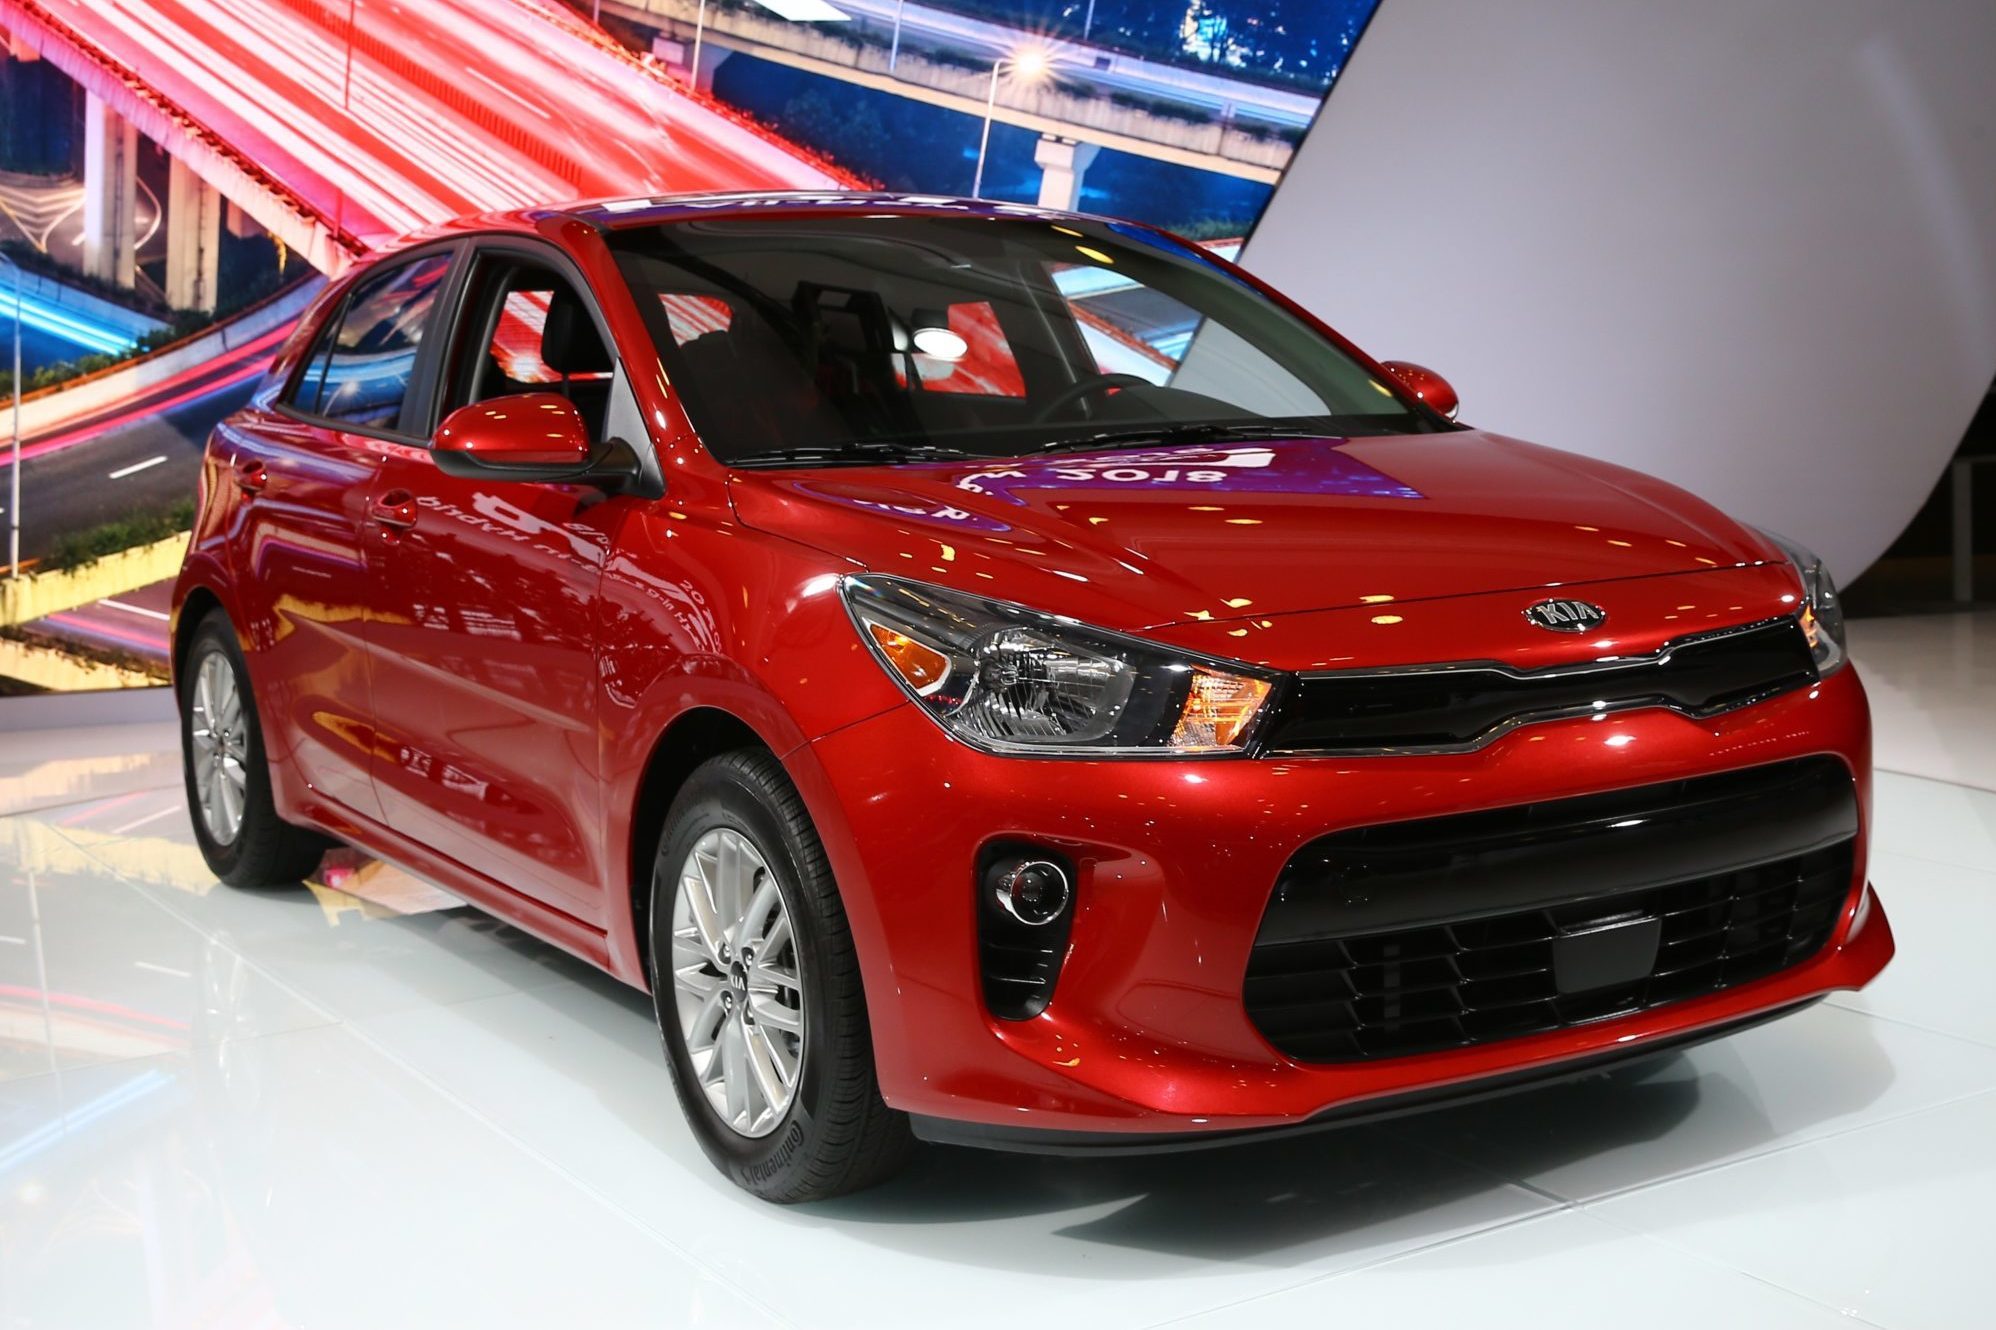 <p>The ideal used car combo is one that wasn't expensive when purchased new and is also a proven reliable ride for a long time after it leaves the lot. Kia Rio checks both boxes and as <a href="https://www.businessinsider.com/best-used-cars-to-buy-2019-5#kia-rio-2" rel="nofollow noopener noreferrer">Business Insider</a> points out, "hatchbacks are less expensive than compact SUVs to begin with, and as they are in less demand than crossover SUVs, they are a better deal for the buyer." When shopping for a used Rio, look back three years because while, "a brand new Kia Rio has a base price of just $15,390 making it one of the <a href="https://www.rd.com/list/best-car-deals/">best new car deals under $18,000</a>; 2016 models now cost about a third less than that."</p>